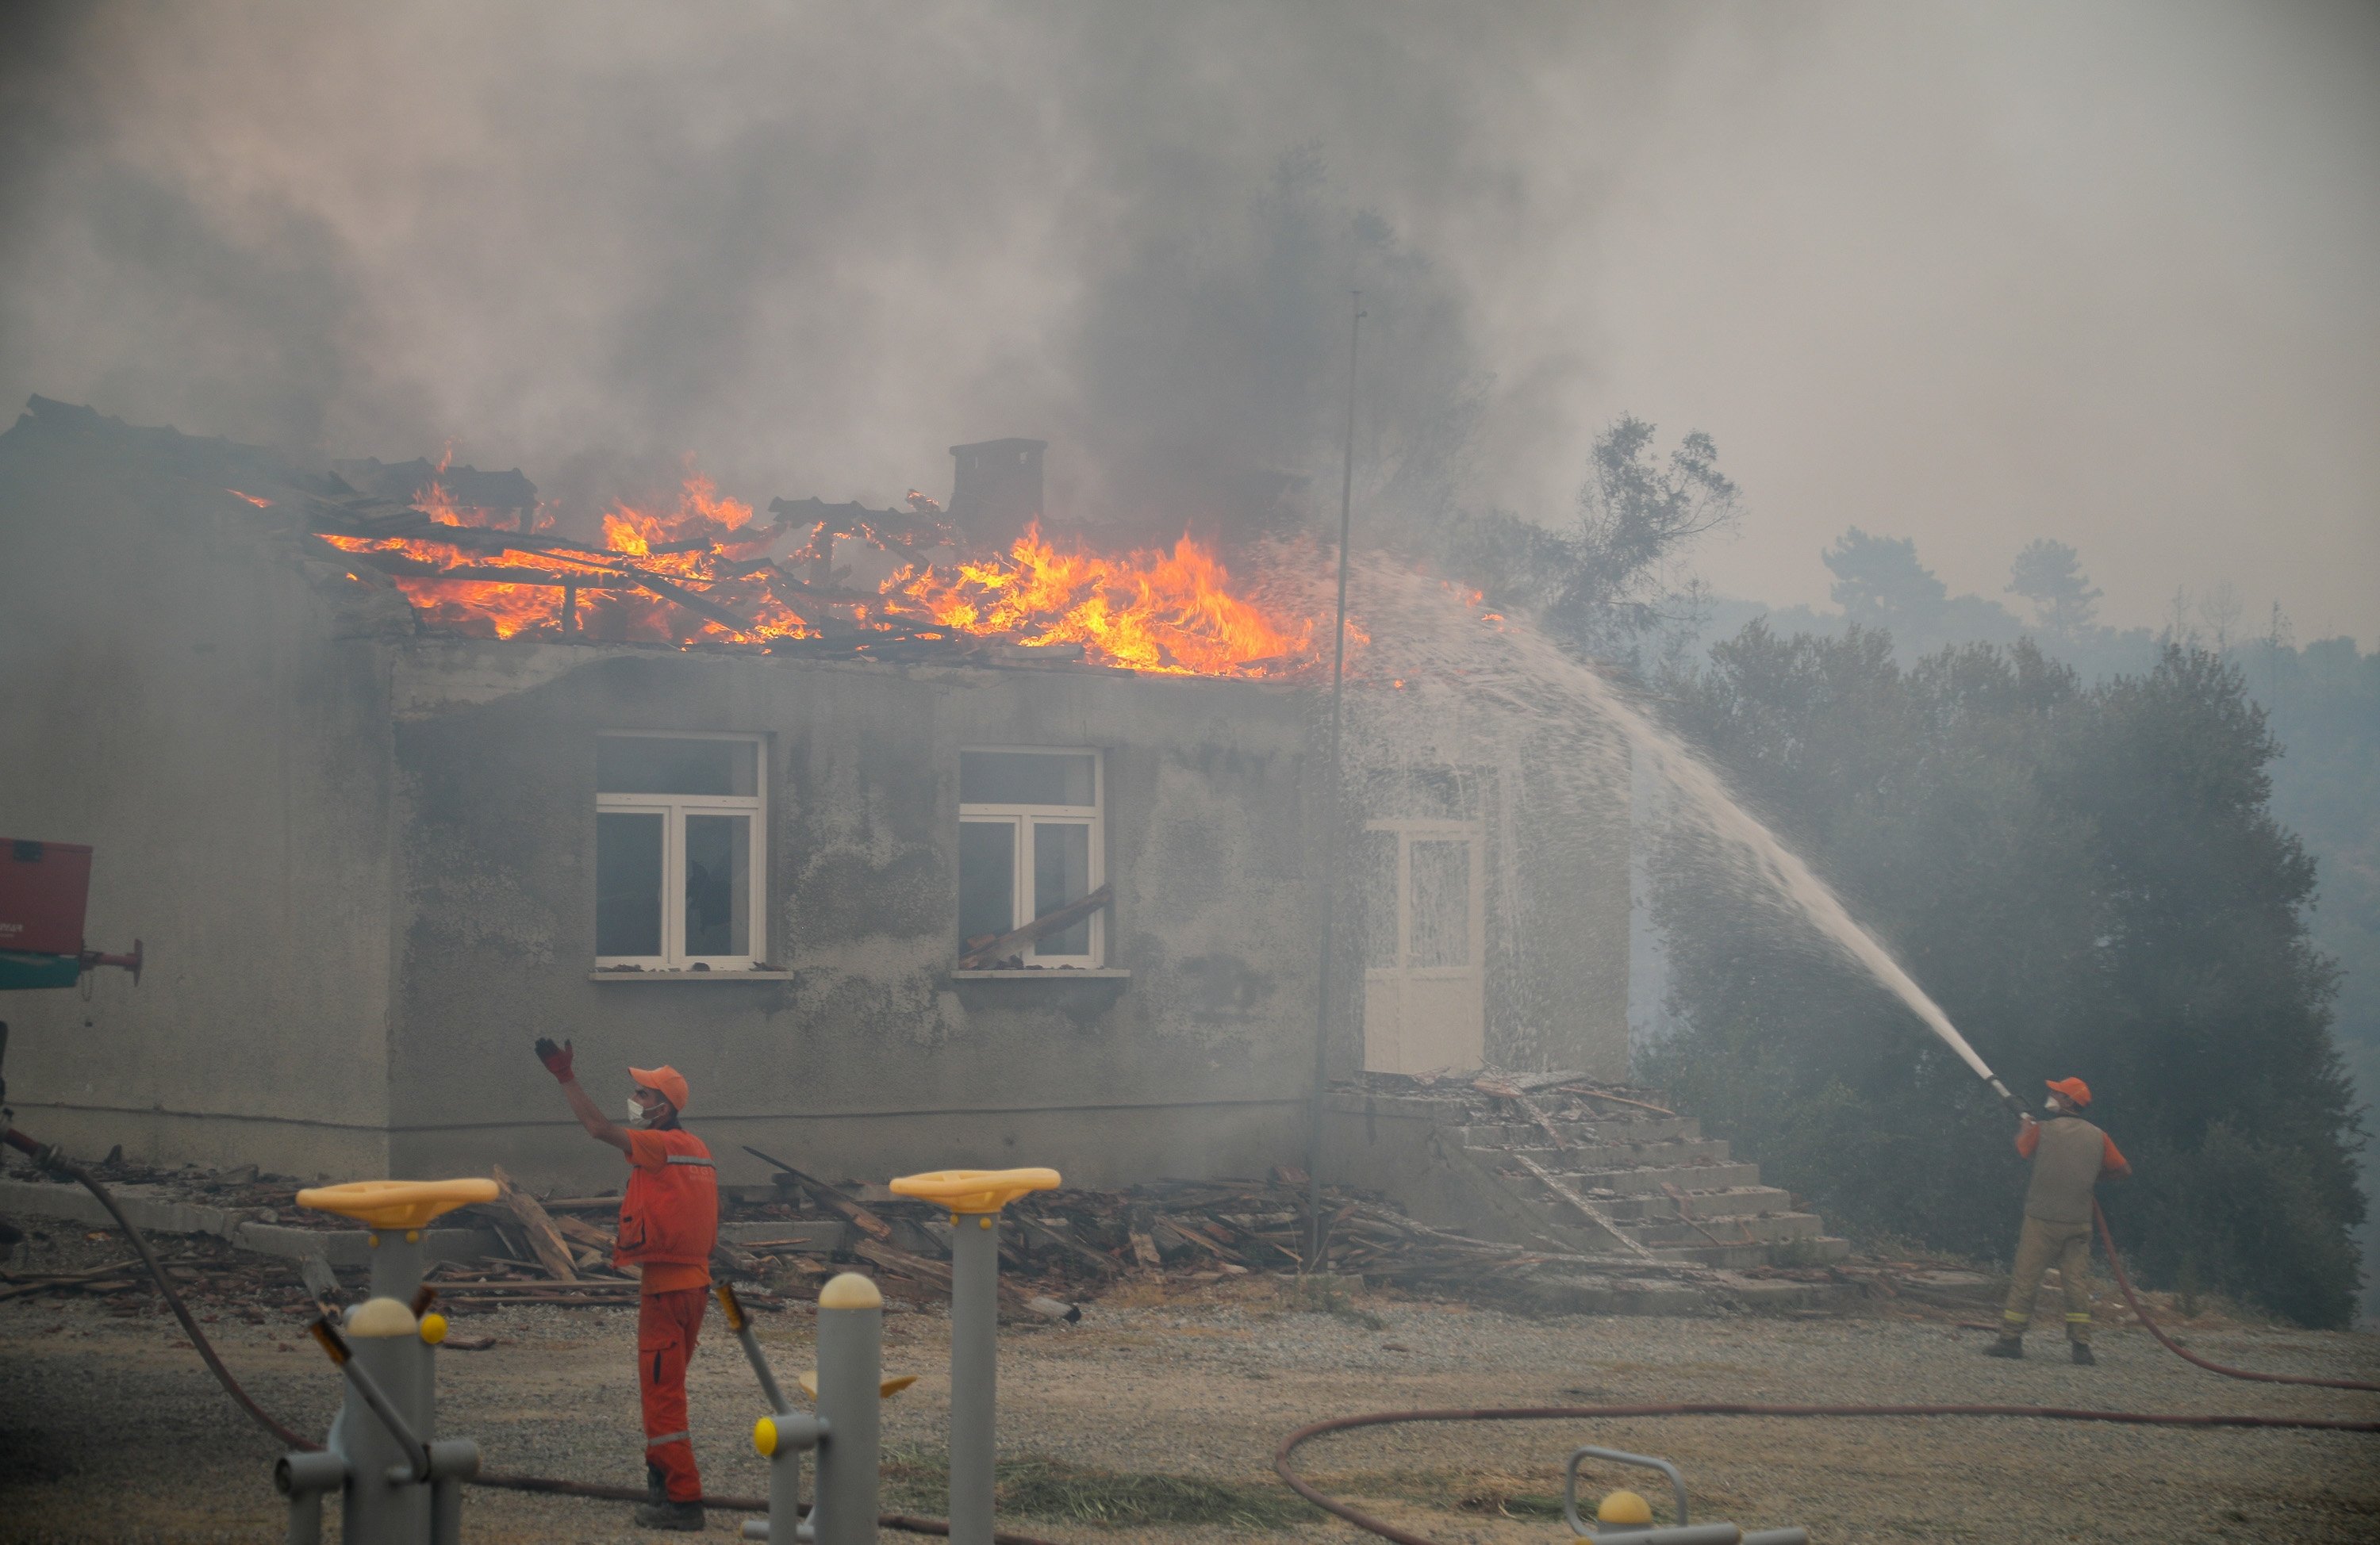 Firefighters try to contain the fire spreading to residential areas in the Manavgat district of Antalya, southern Turkey, July 29, 2021. (DHA Photo)